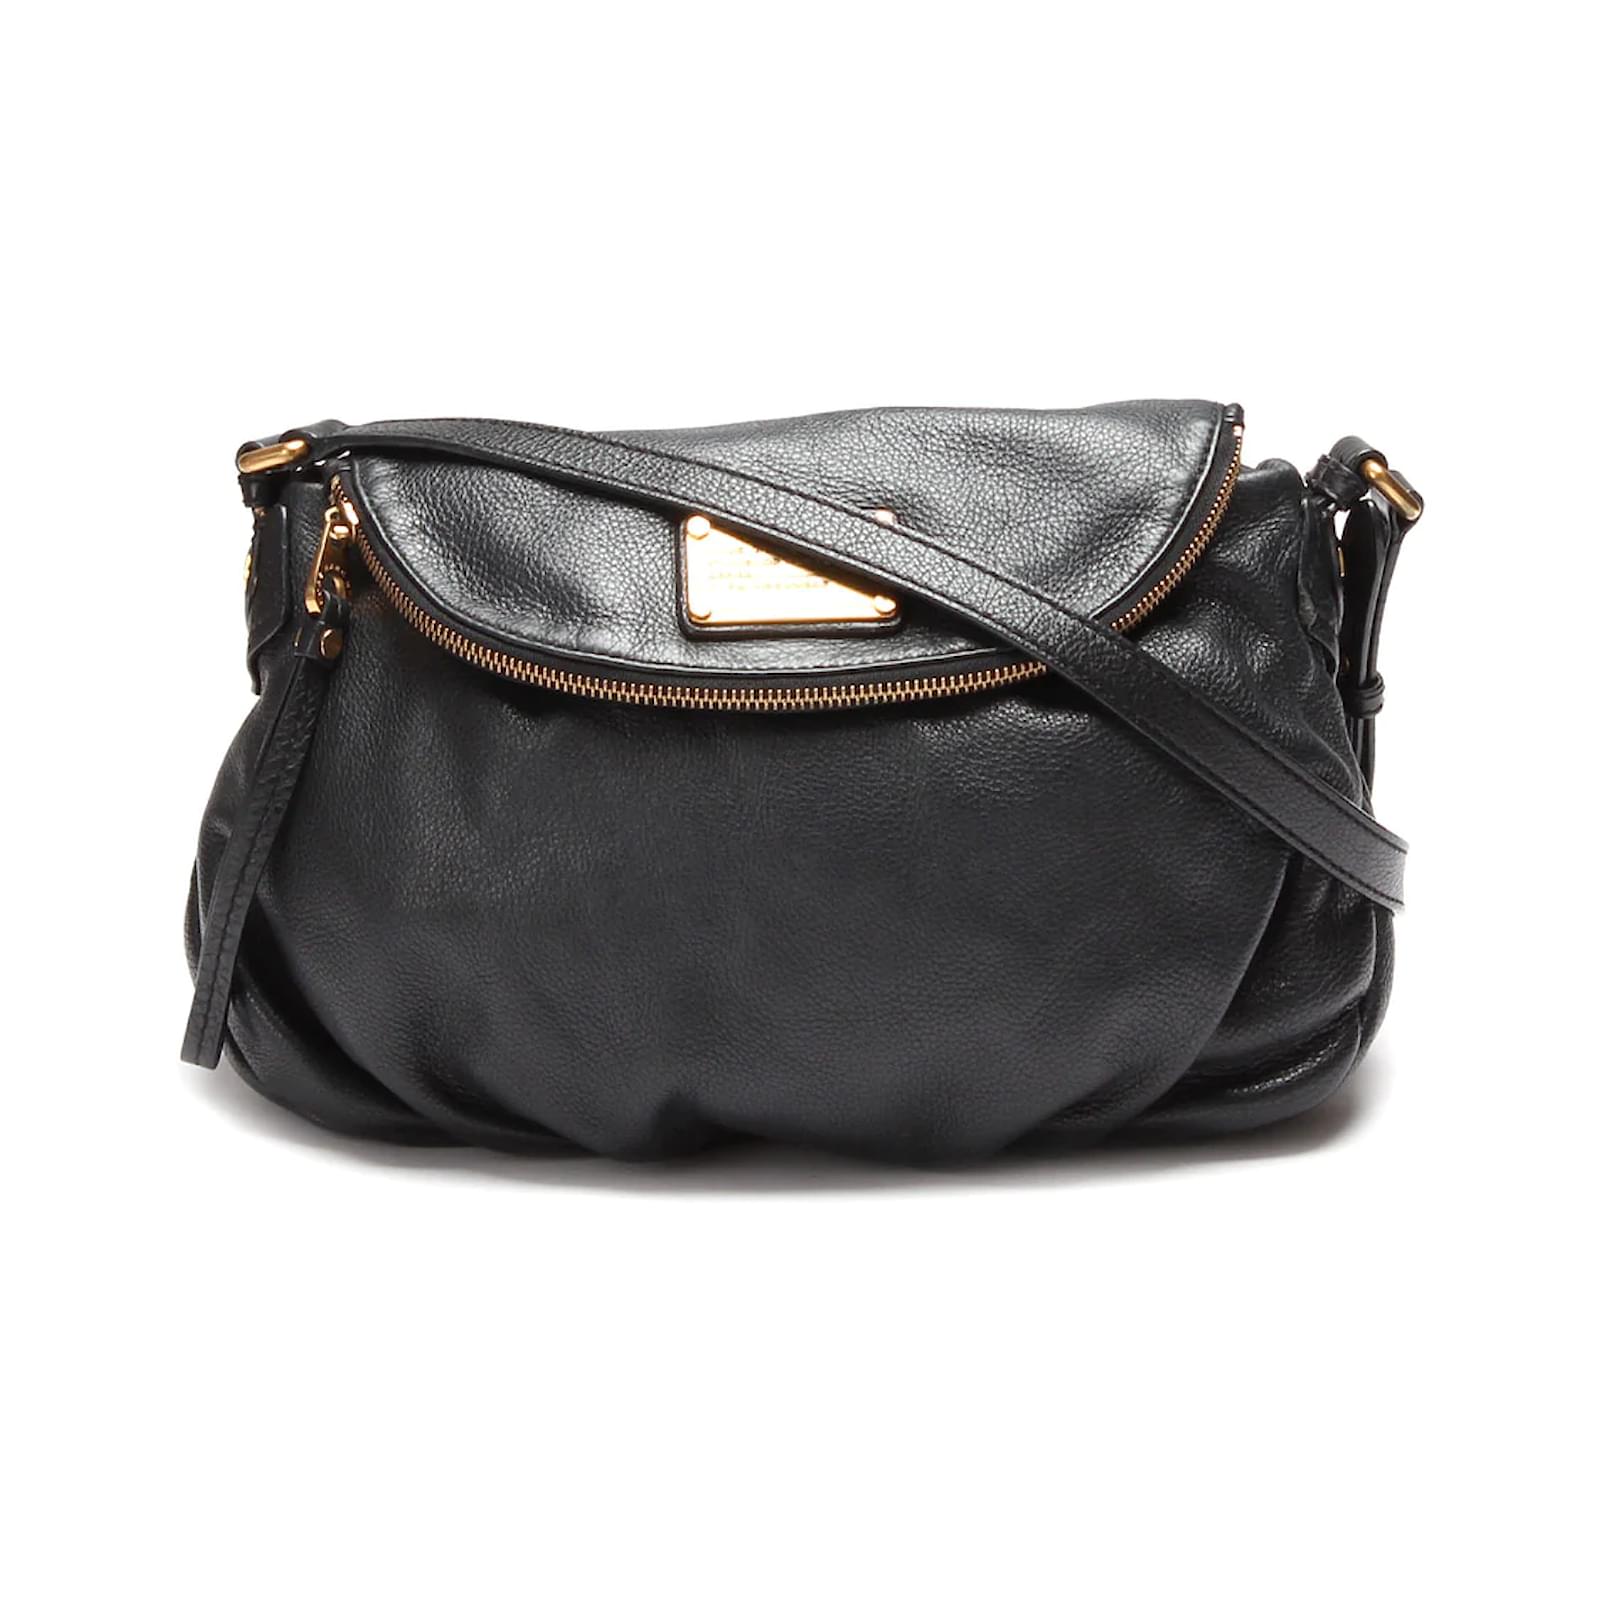 Buy the Marc By Marc Jacobs Black Pebbled Leather Crossbody Bag